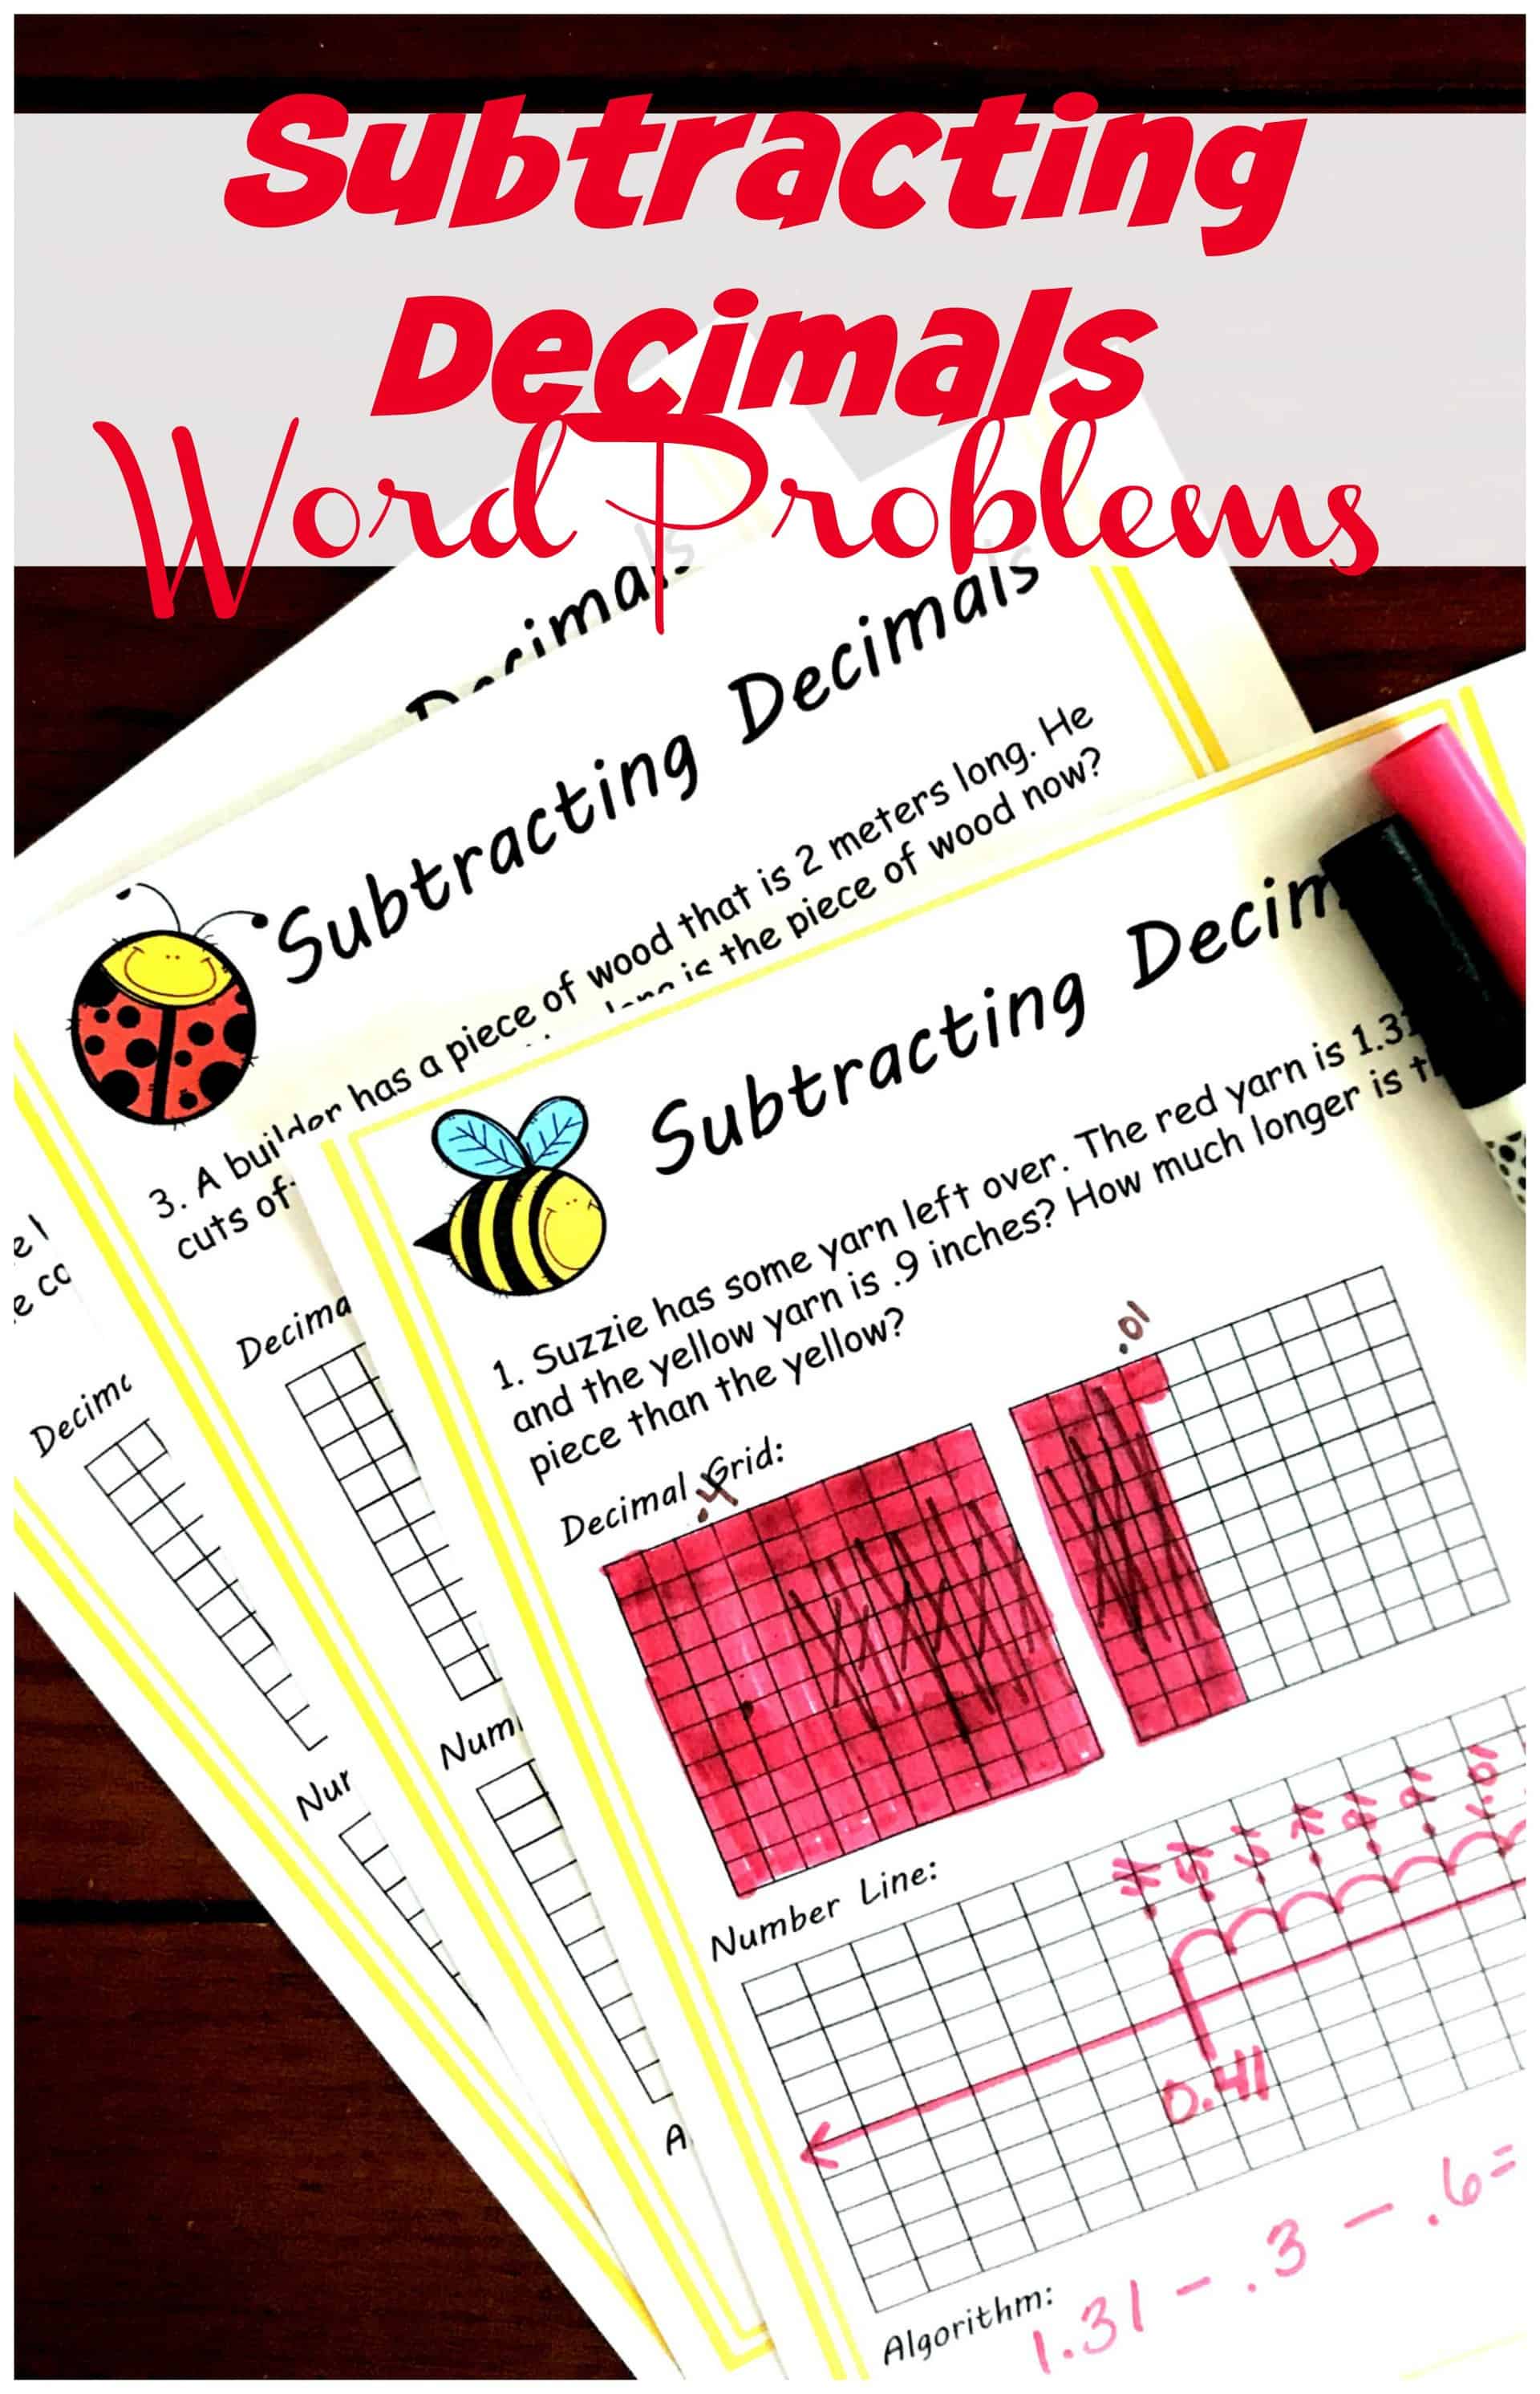 Subtracting decimals word problems worksheets on a table with markers.